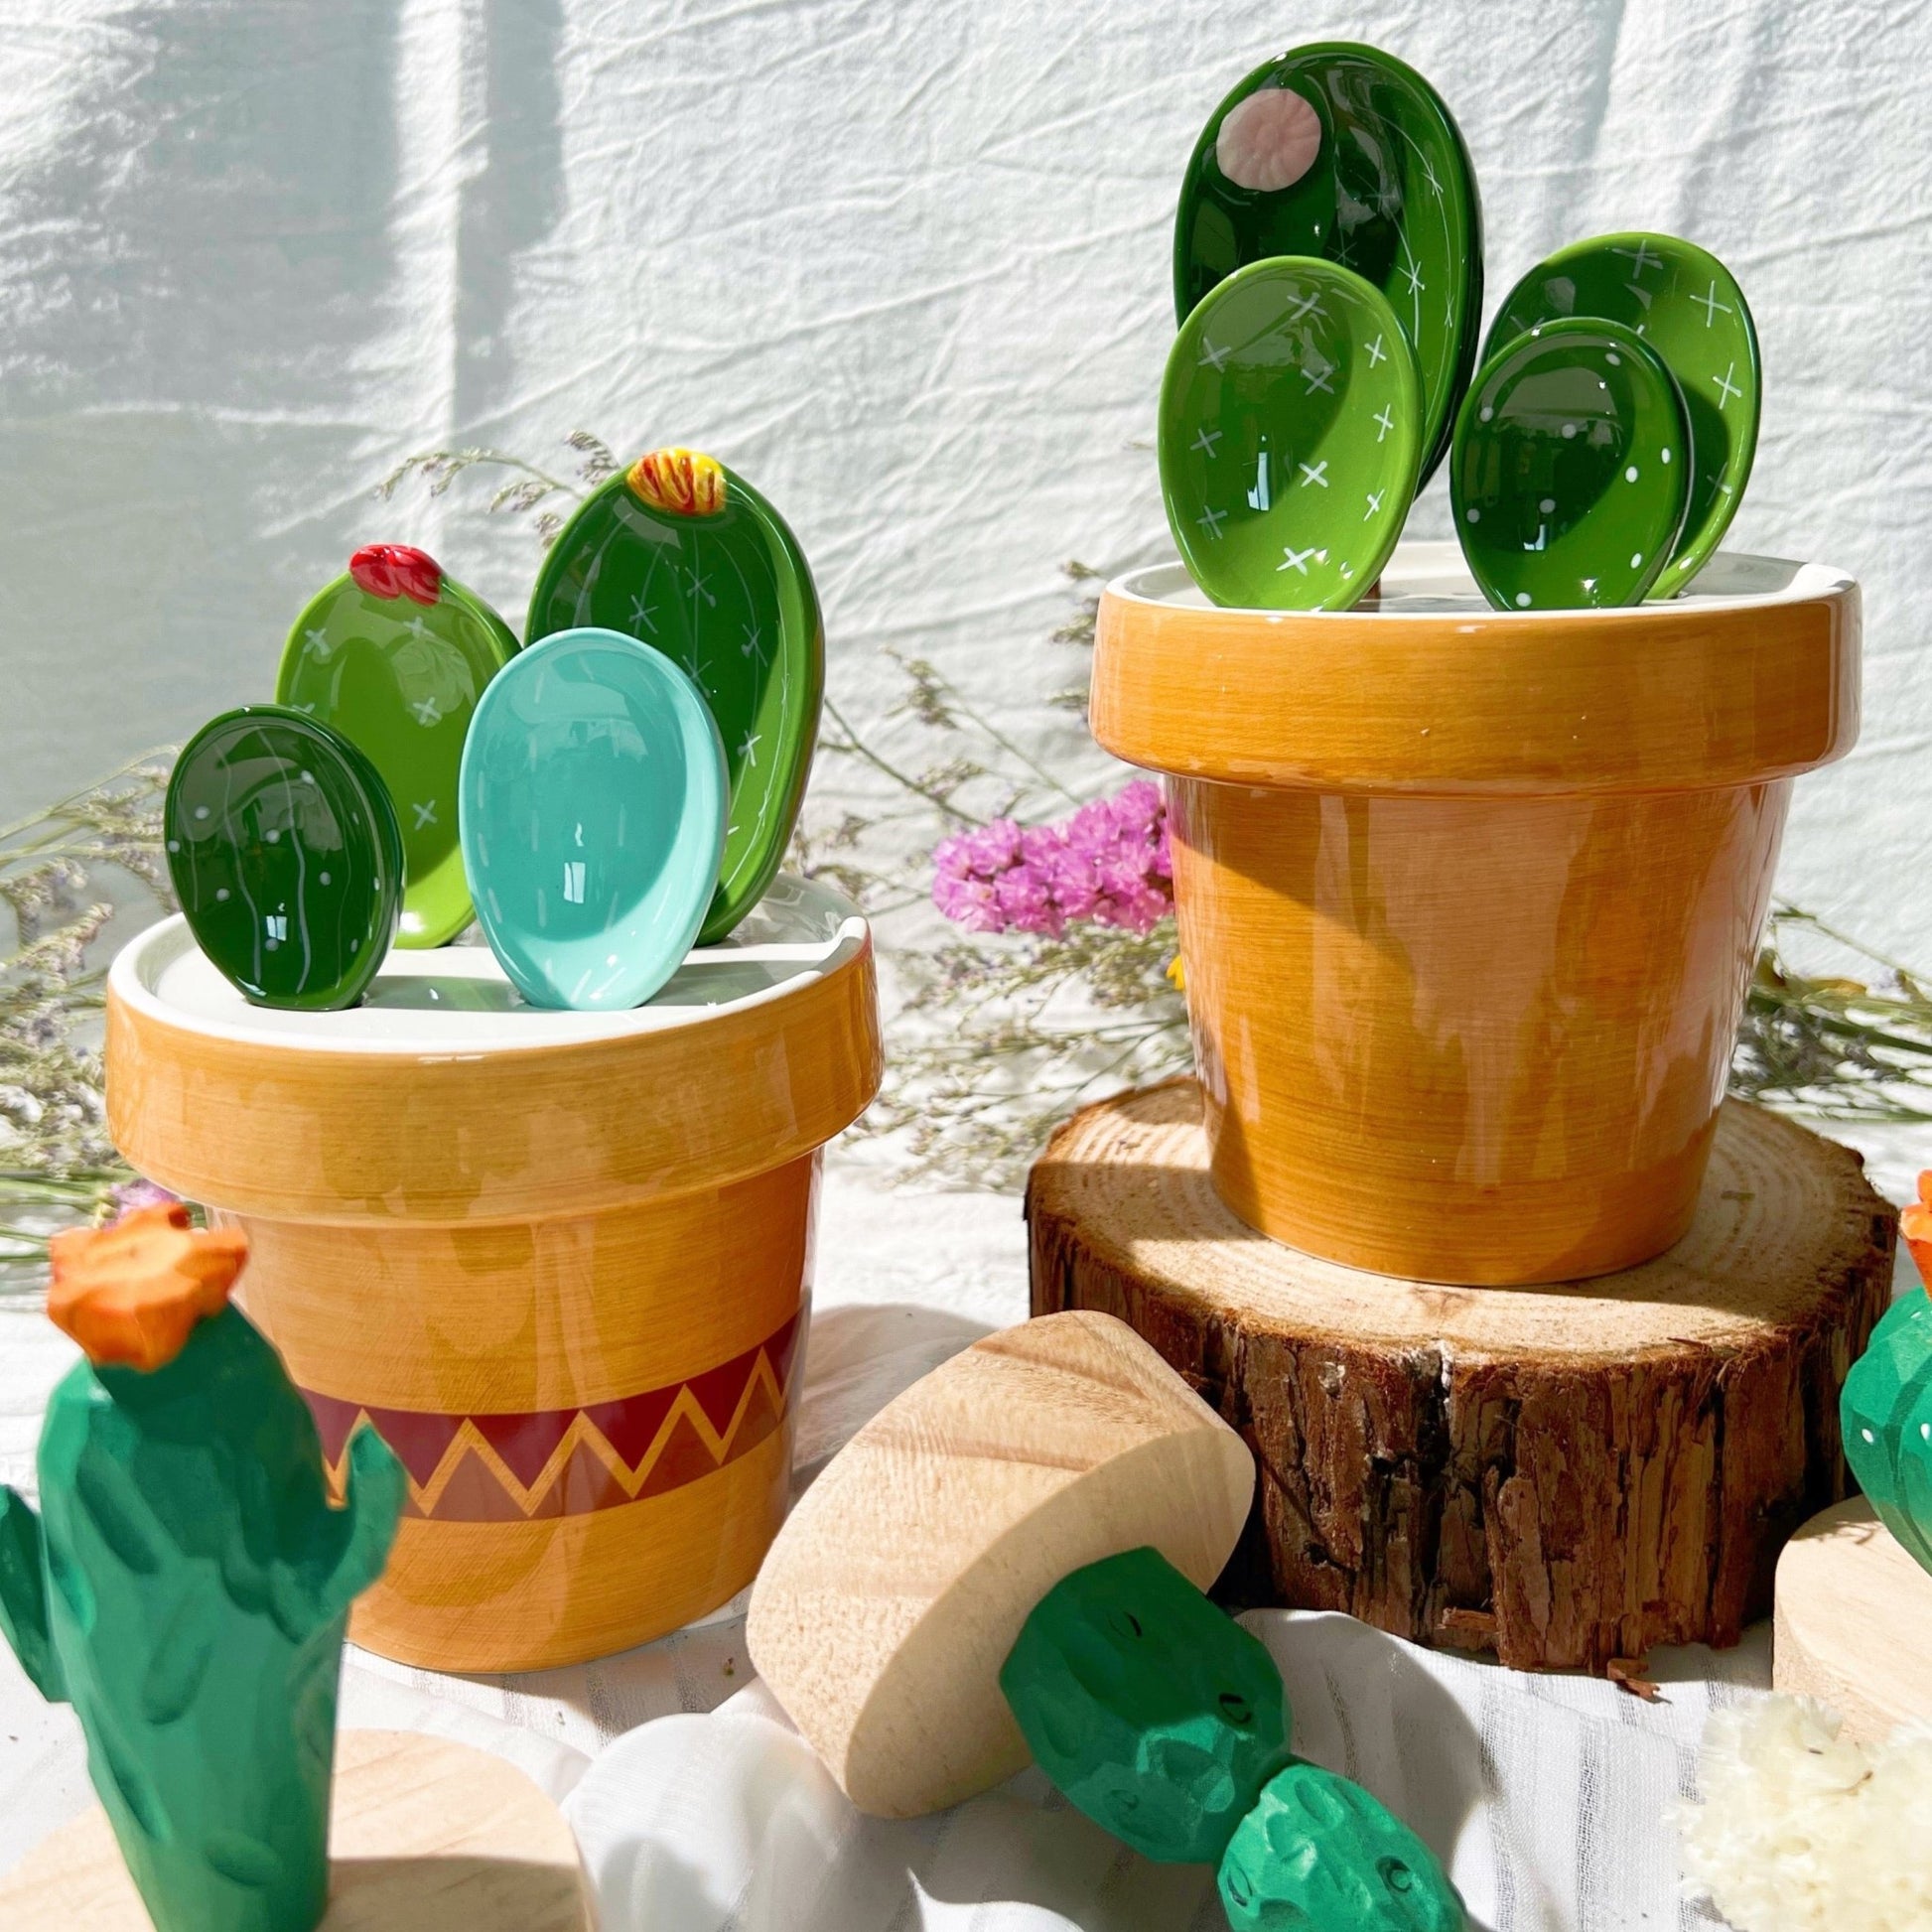 Cute Cactus Measuring Spoons with Base-Gift Set – Coomale